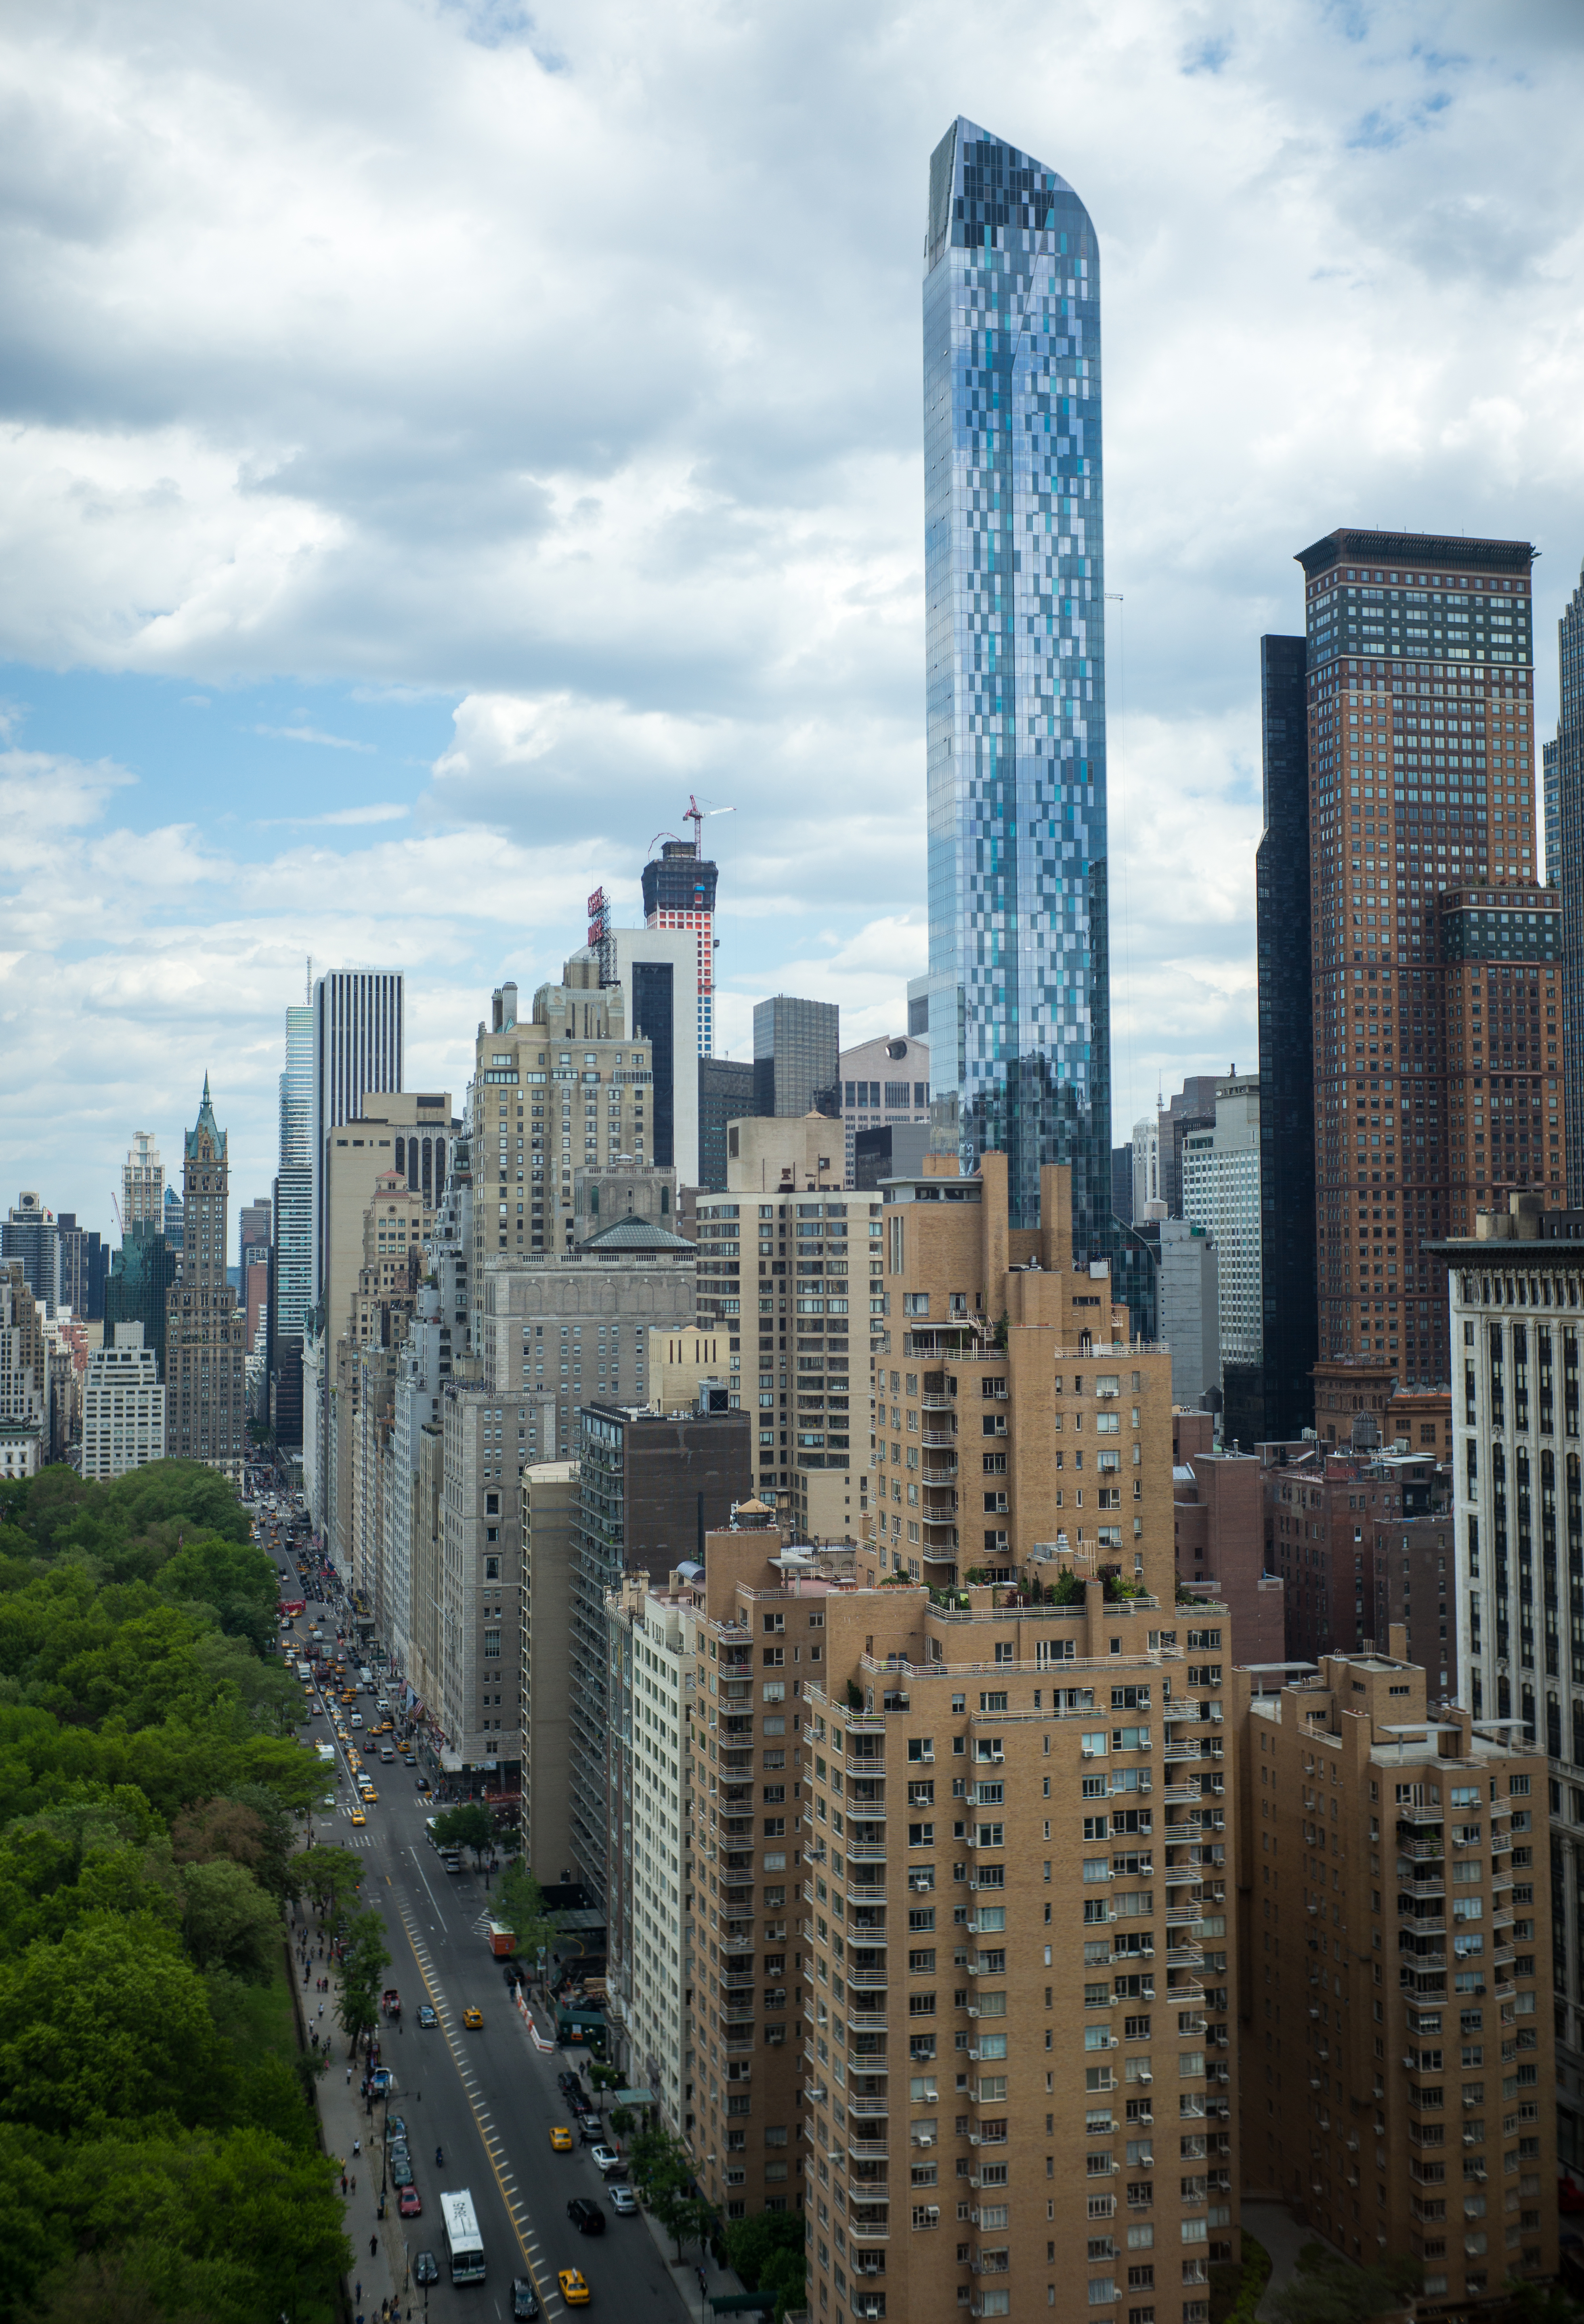 A view of the southern skyline of Central Park is seen on May 19, 2014 including the 90-story One57 luxury condominium building under construction in New York City. (Robert Nickelsberg—;Getty Images)